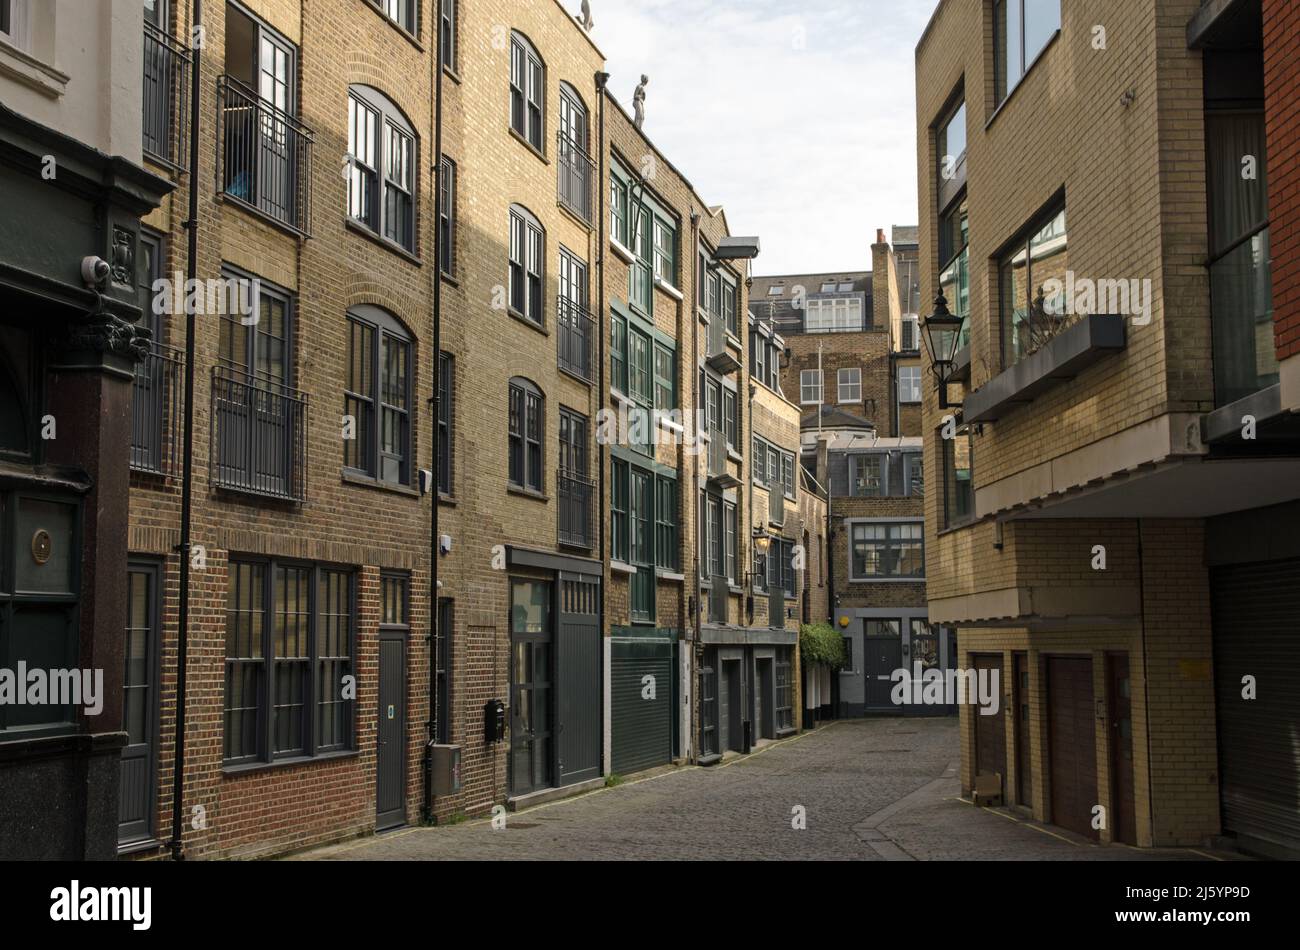 The historic mews Bourtlet Close in the Fitzrovia district of Westminster, Central London.  The buildings used to be warehouses and are now smart offi Stock Photo